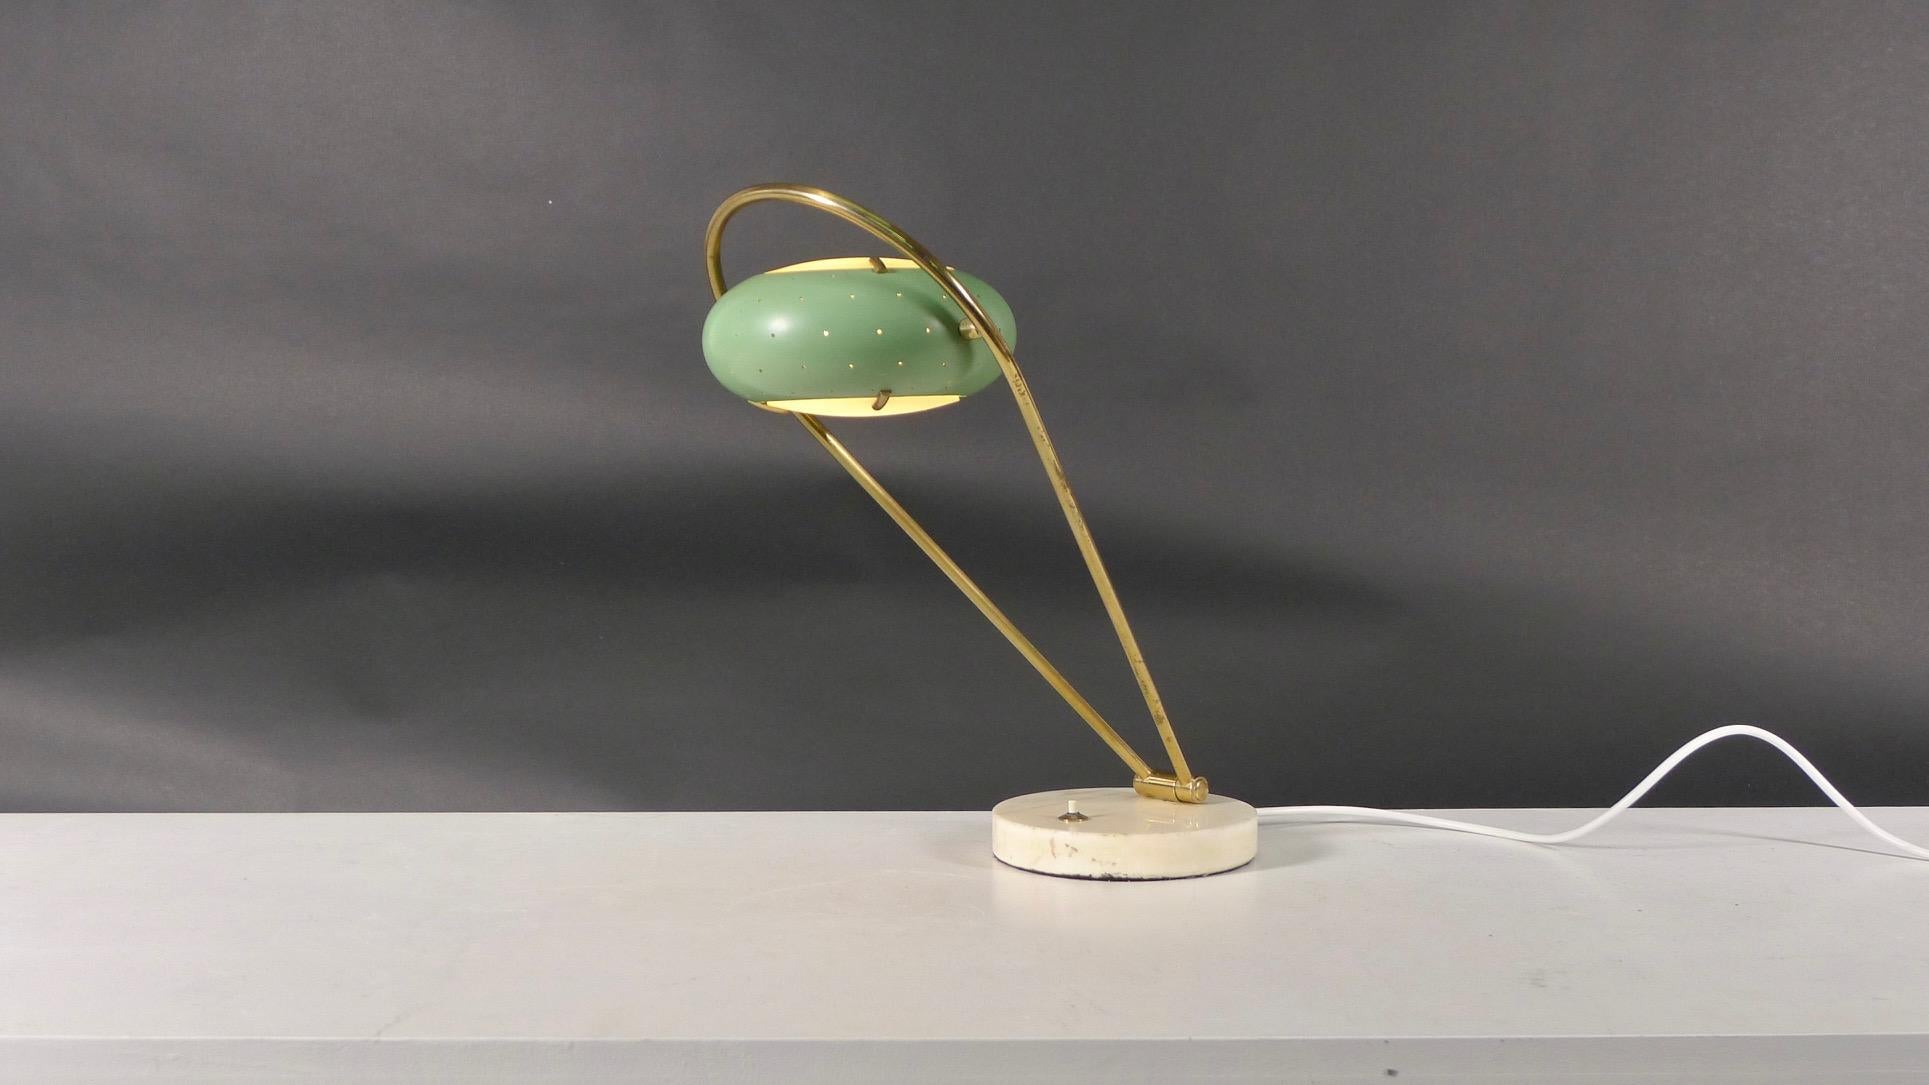 Metal Stilux Lamp, 1950s, fully adjustable with green perforated shade